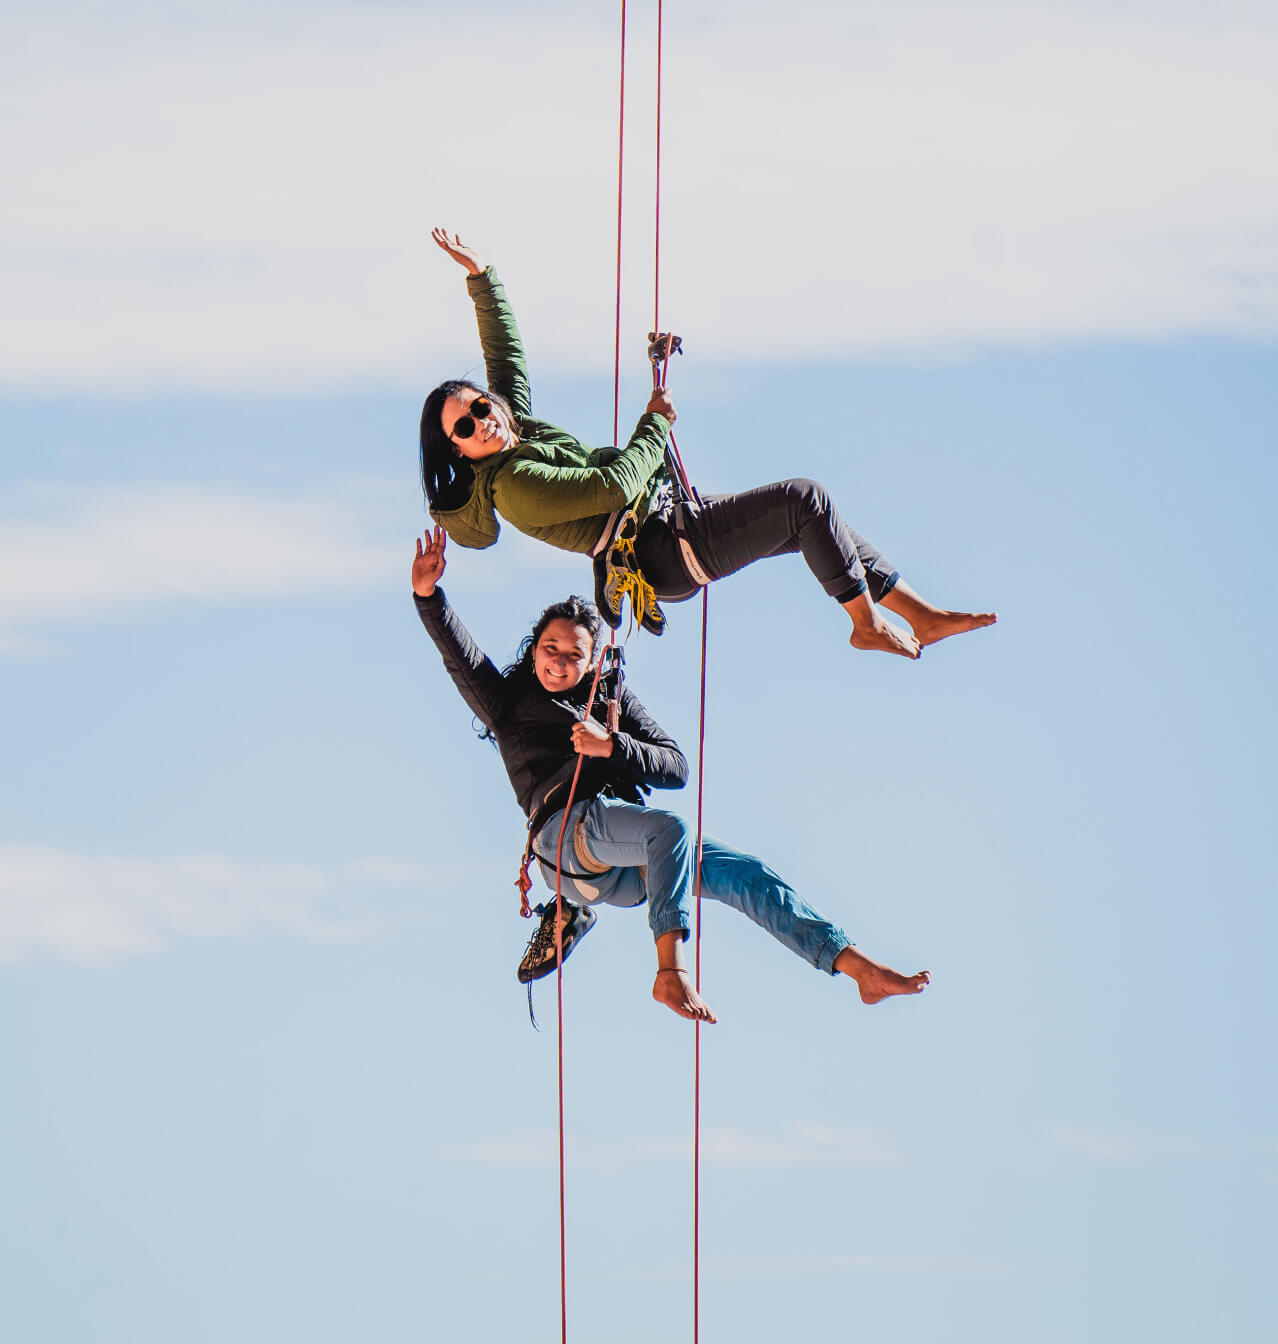 Climbers in jackets repelling on a rope 